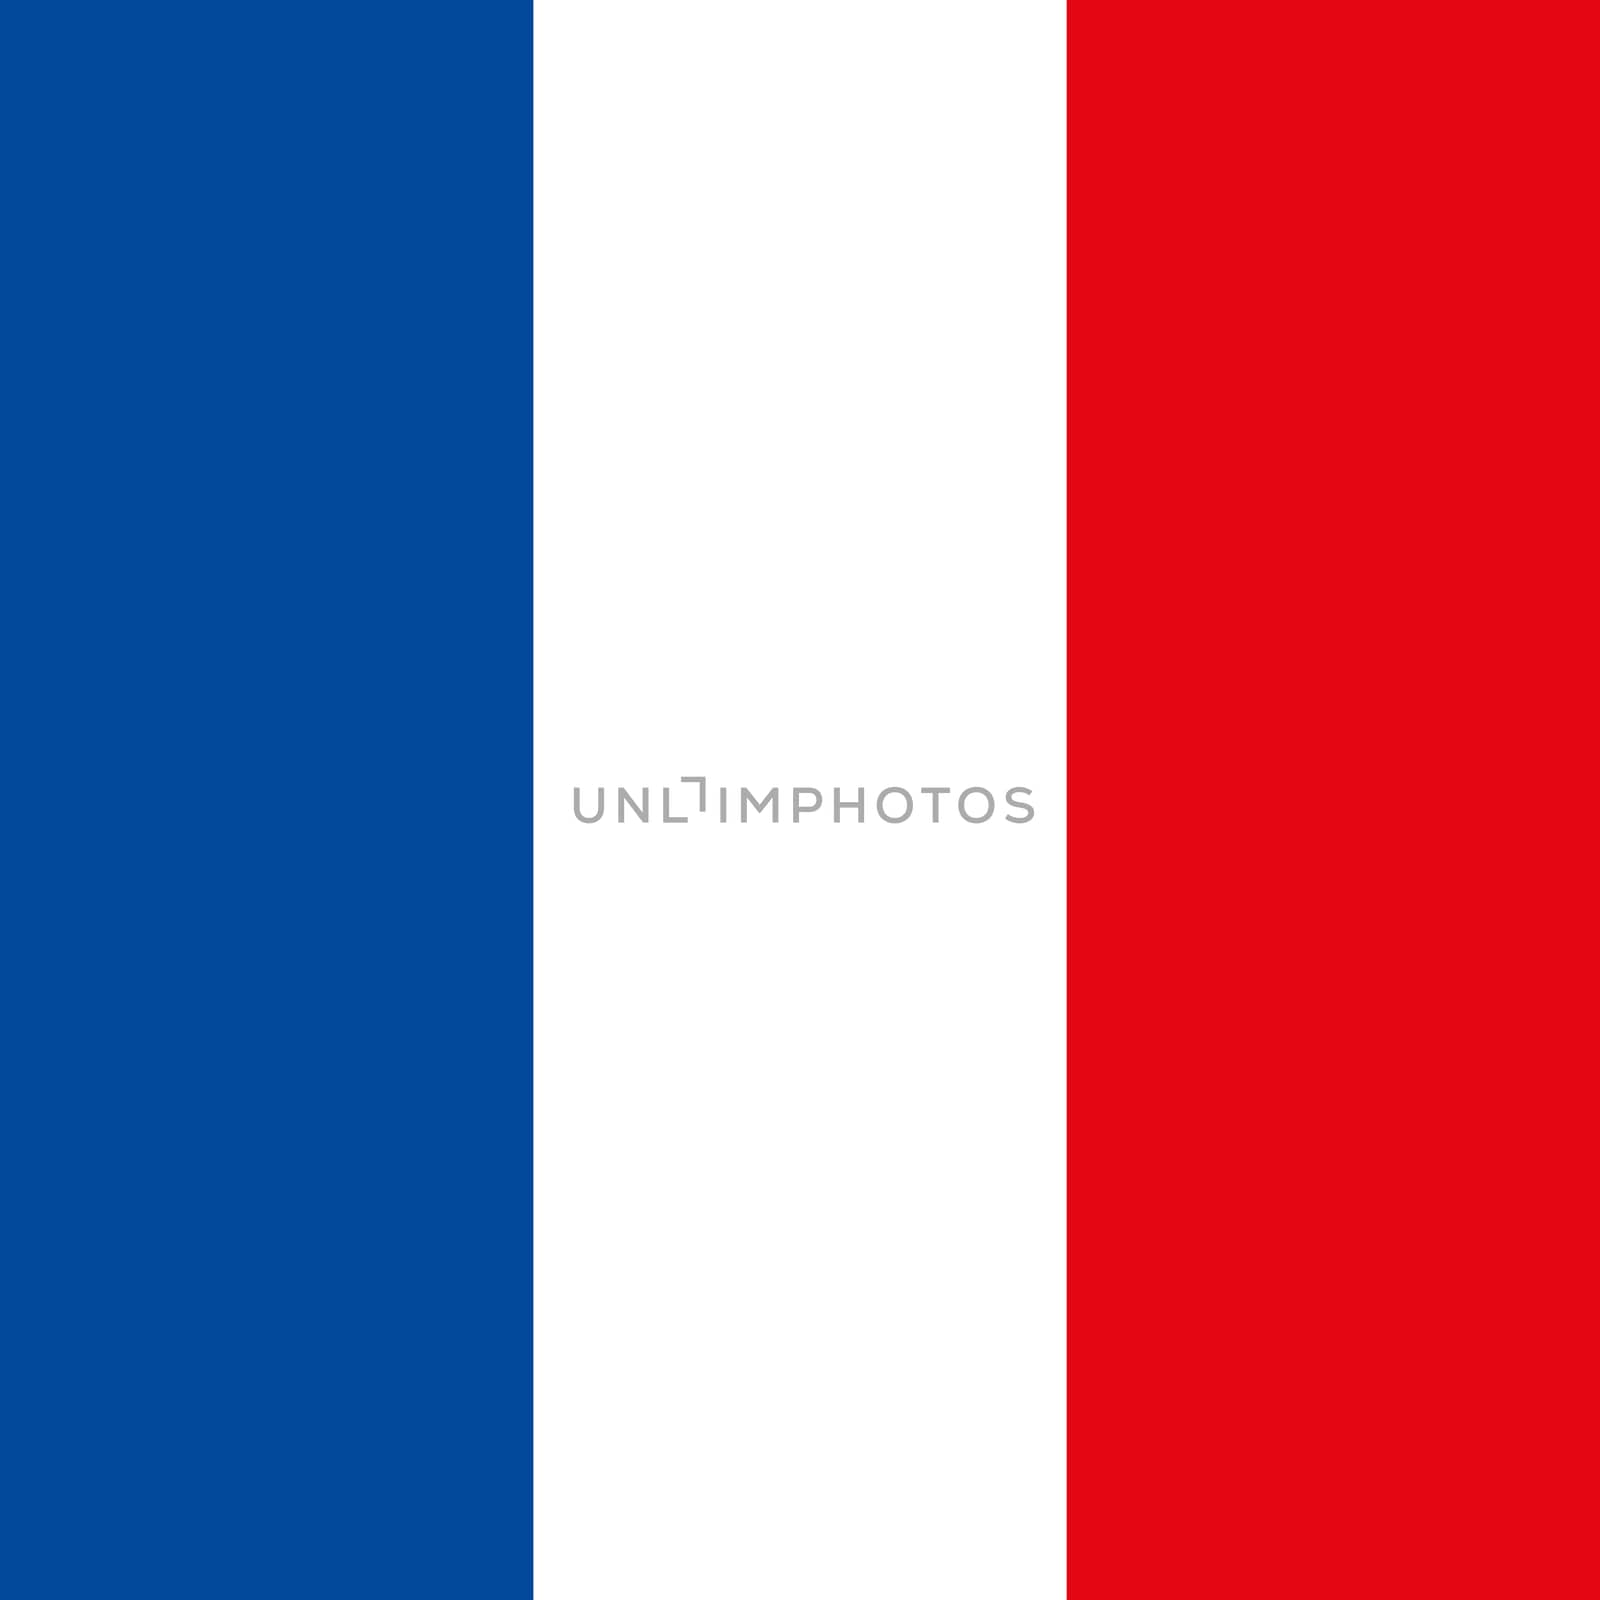 French square flag by germanopoli